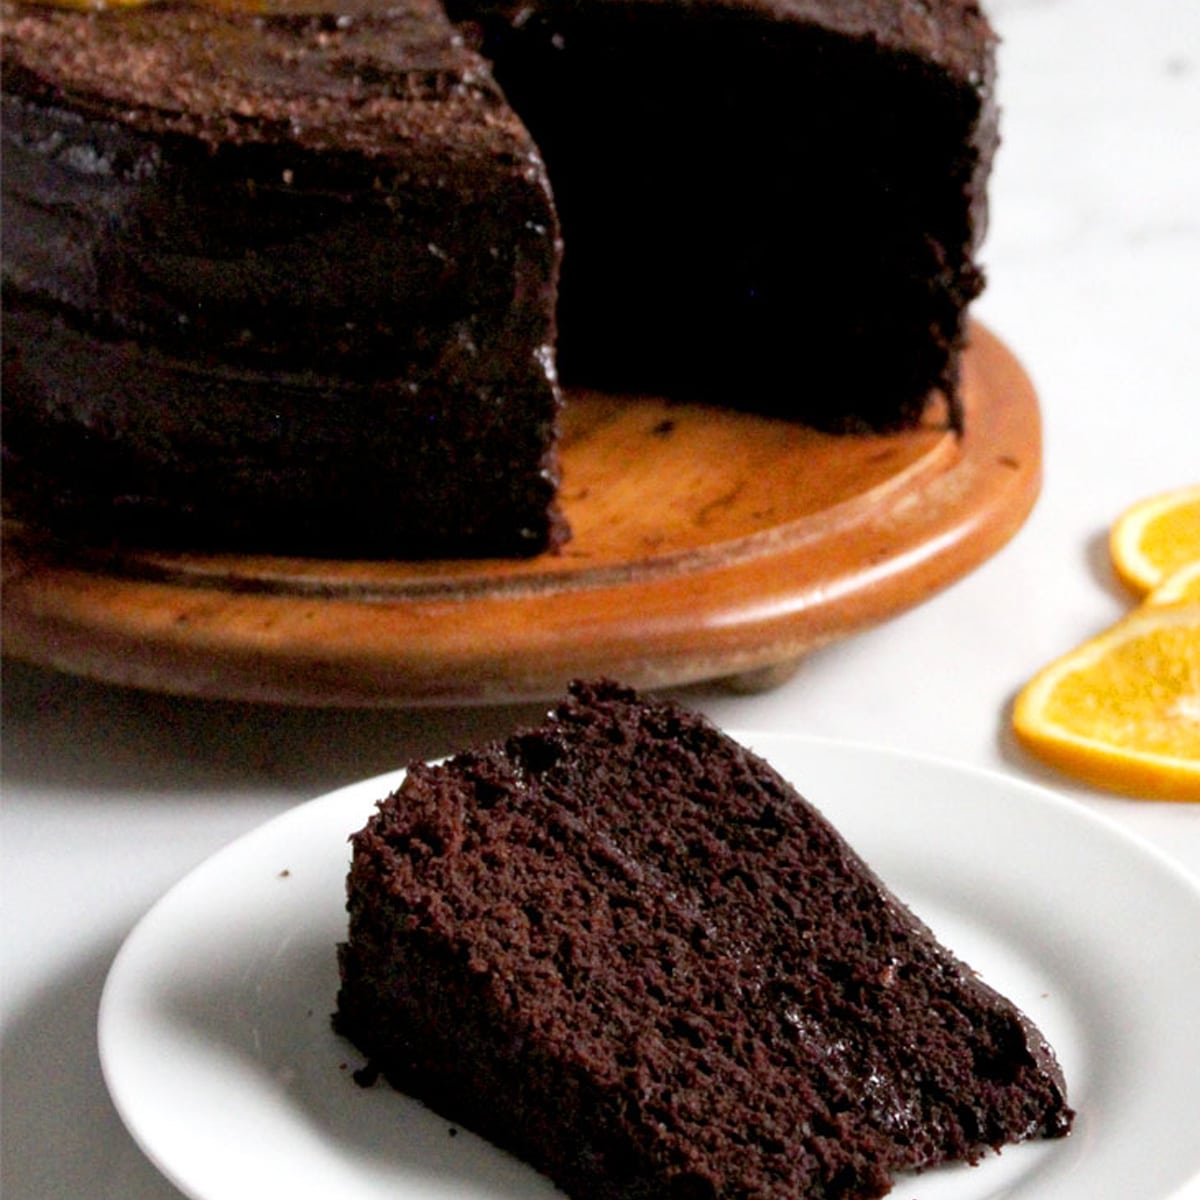 Close up of a slice of chocolate orange cake on a plate in front of a wood cake board with the double-layer cake on it.